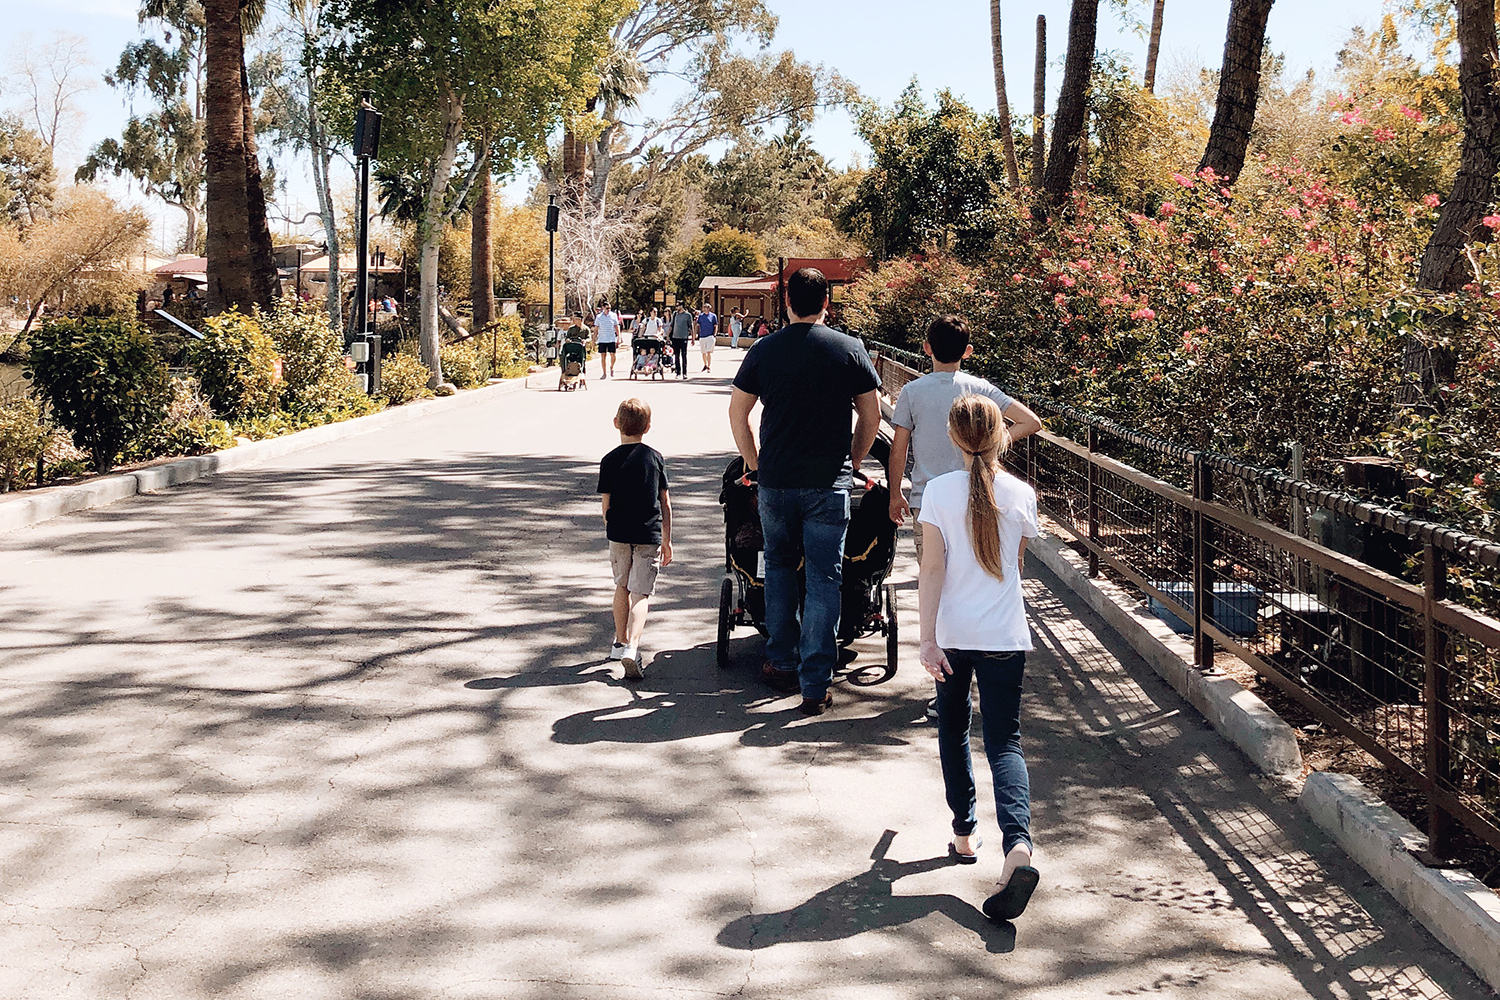 A day at the Phoenix Zoo with the fam. The perfect weekend weather here in the valley and just in time to enjoy this kind of outing before the temperatures rise. Catch a peek into our time over on Haus of Layne! #Zoo #Phoenix #Arizona #FamilyActivityIdeas #WeekendVibe #MomBlogger